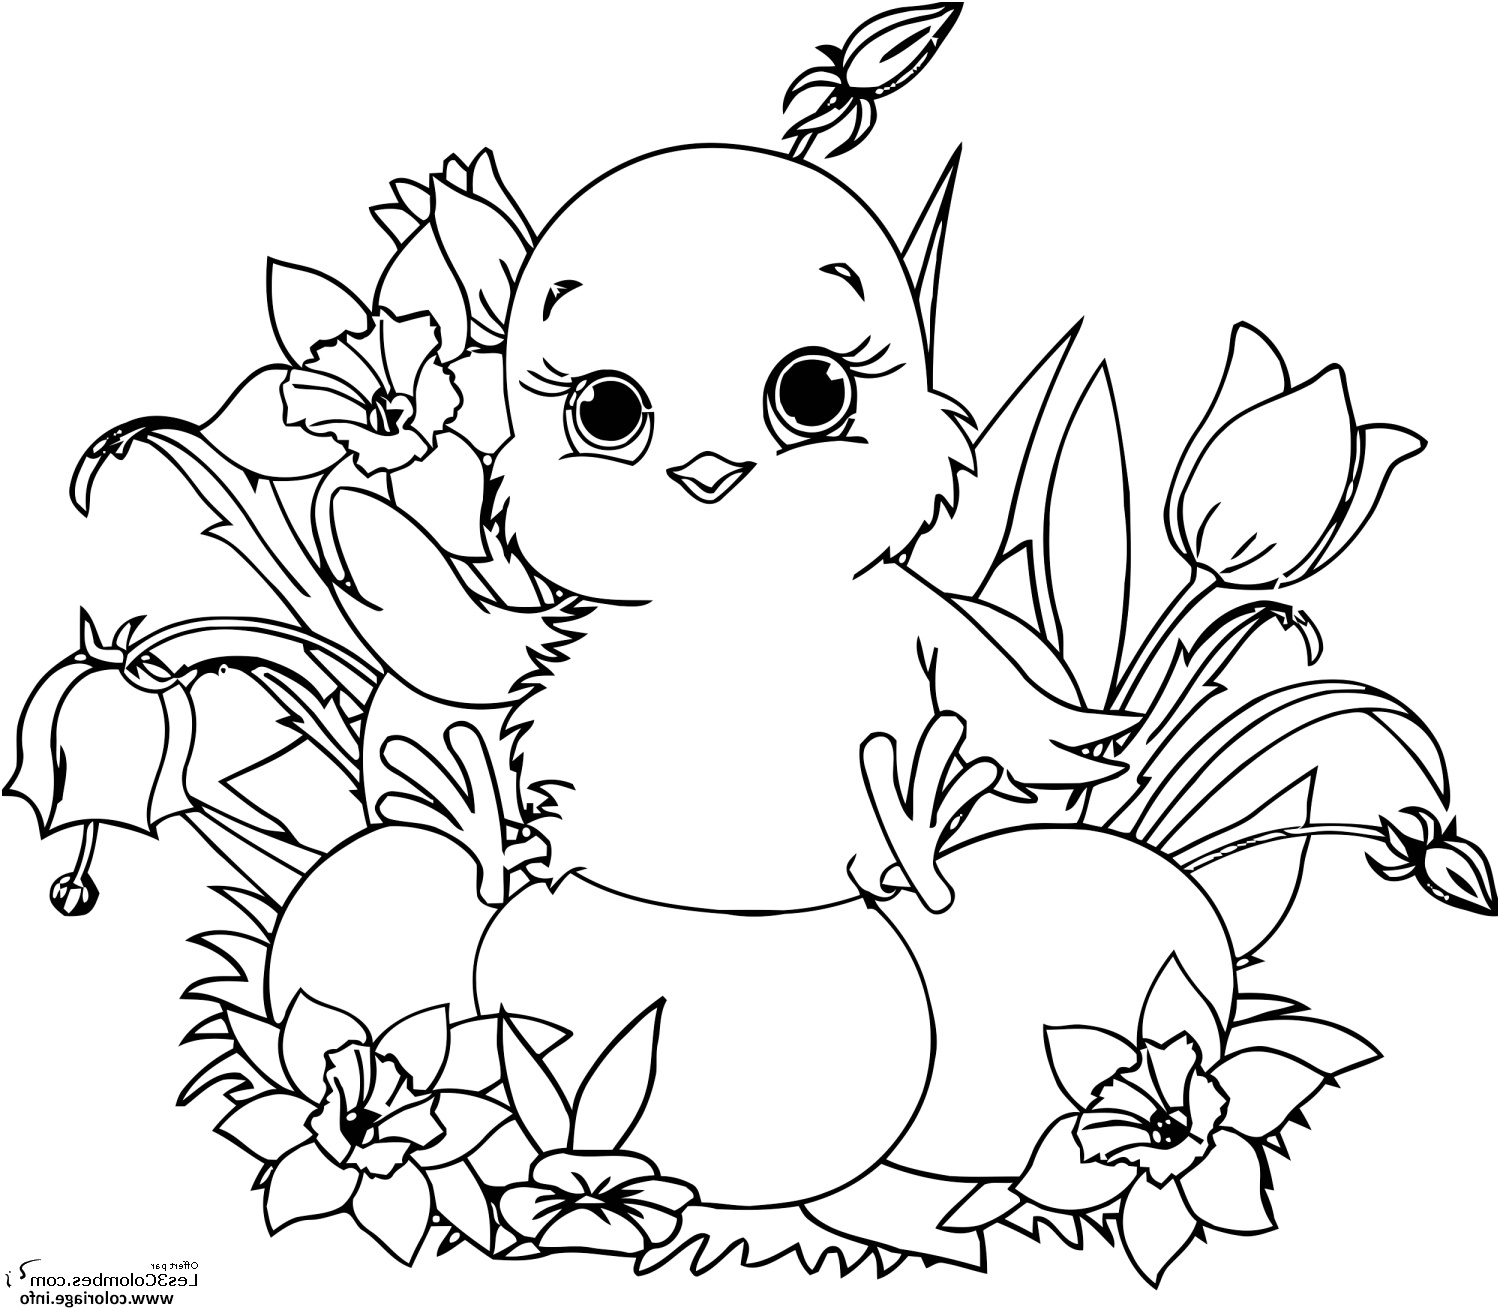 Coloriage Oeuf Paques Nice Coloriage Poussin Paques Oeufs Dessin